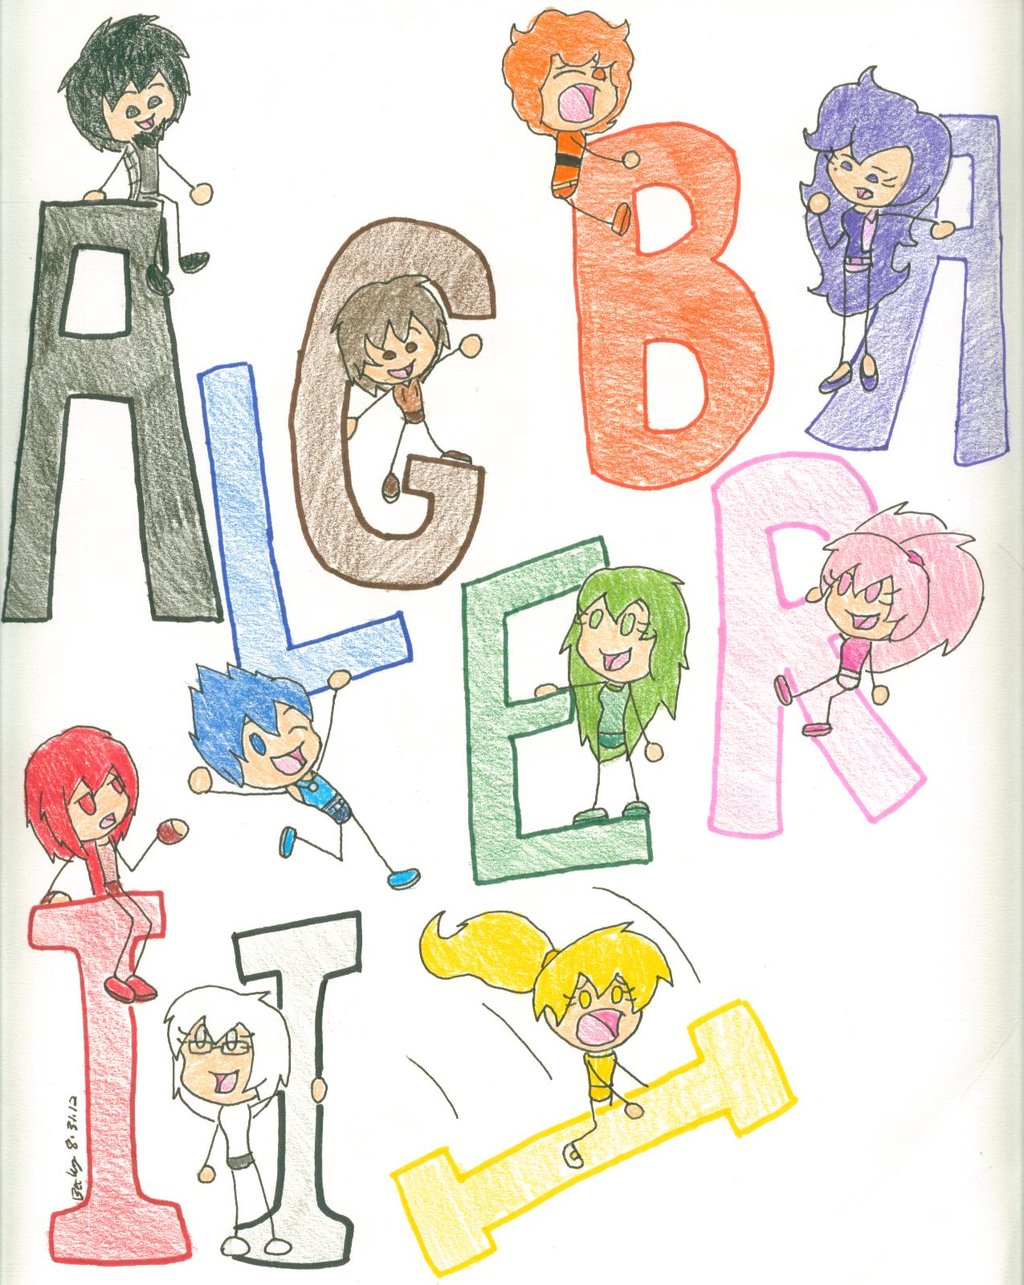 Cover by beckimaginative on. Algebra clipart drawings